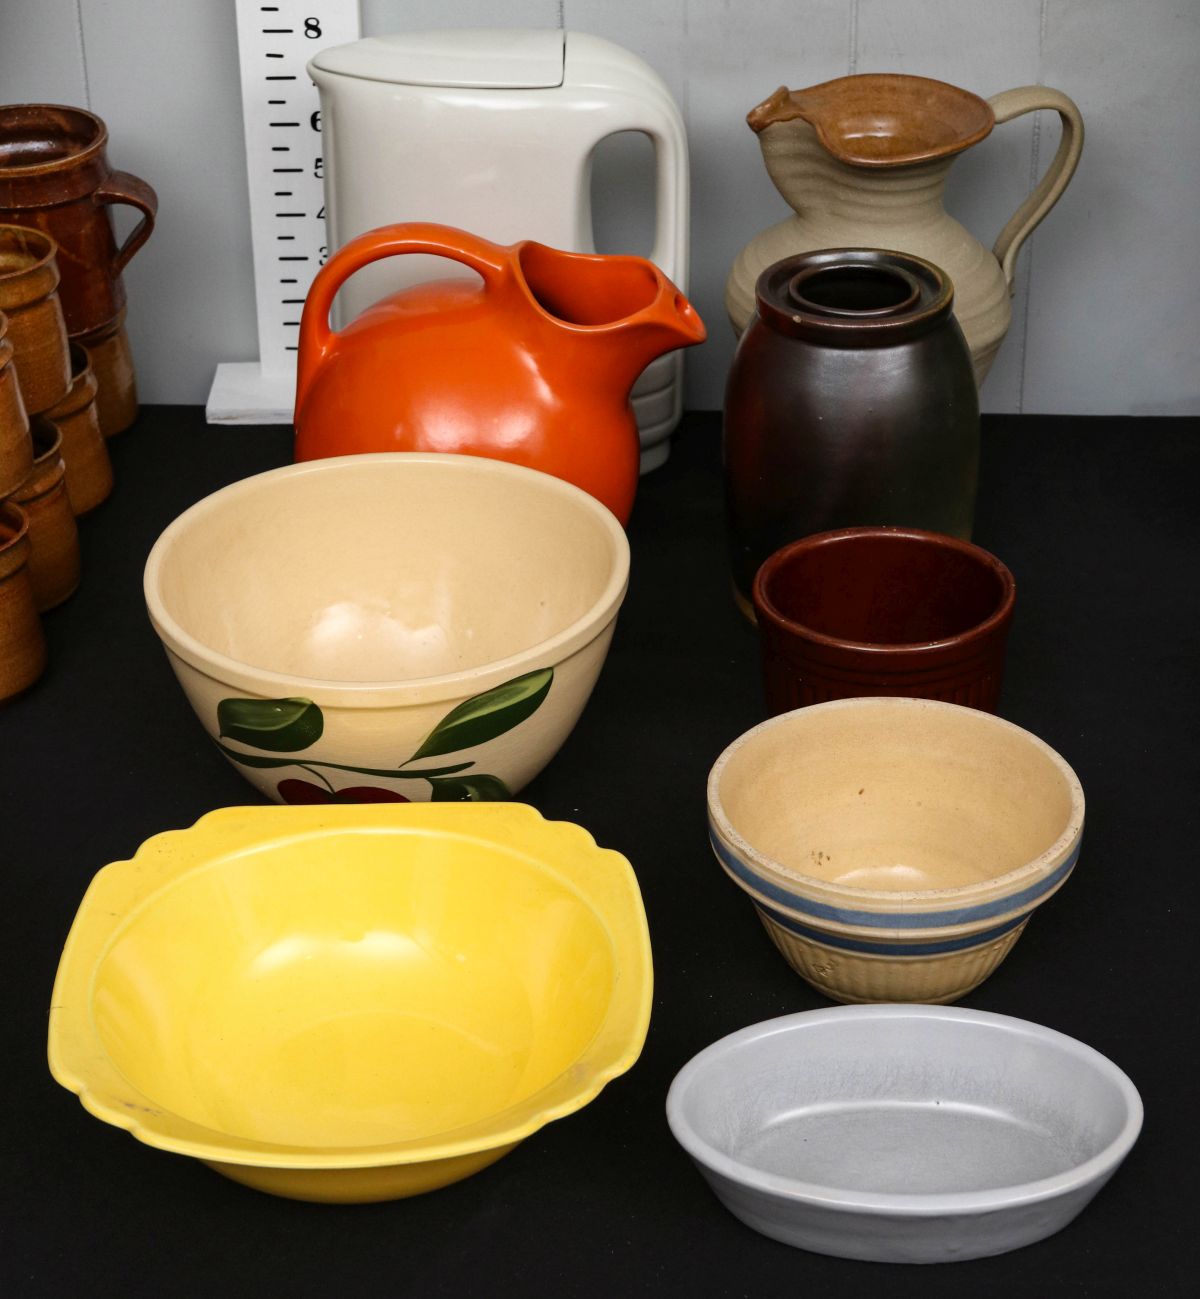 FIESTA WARE PITCHER AND OTHER STONEWARE